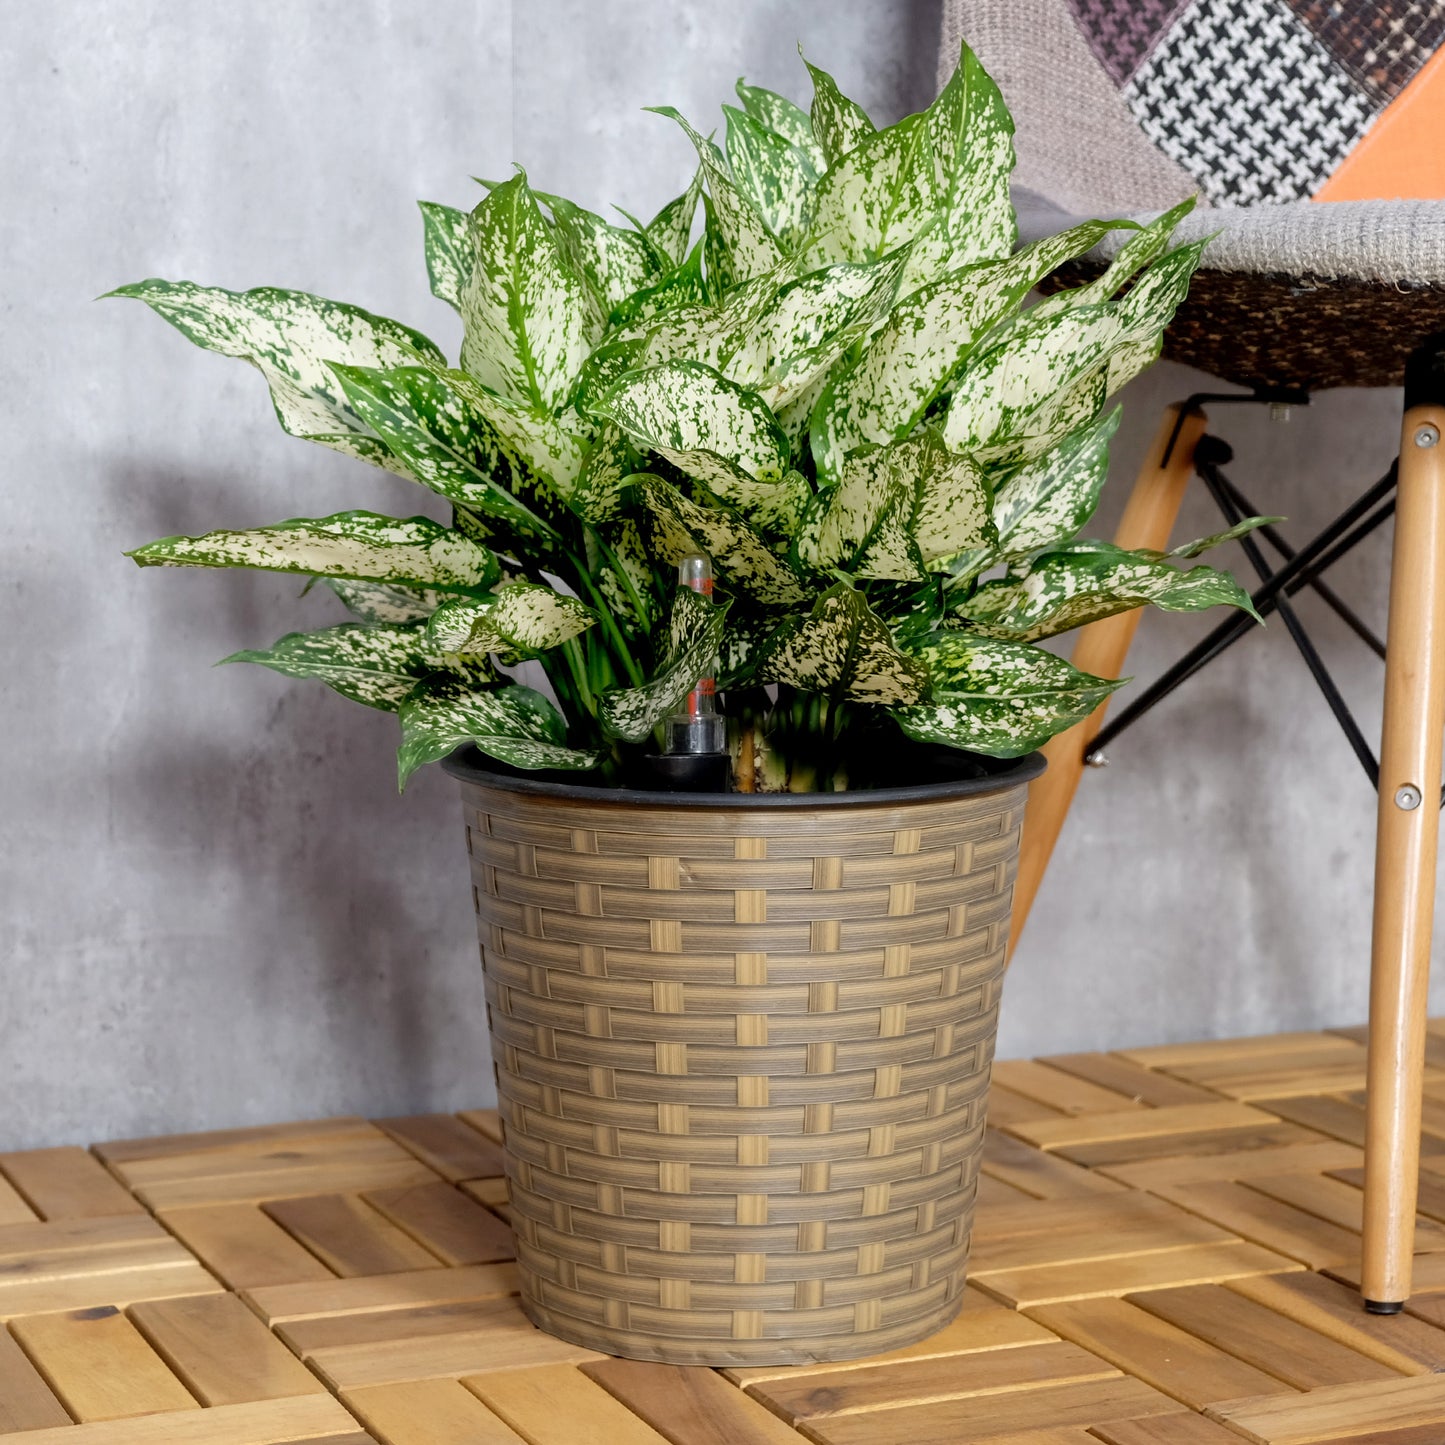 10.2" Self-watering Wicker Decor Planter for Indoor and Outdoor - Round - Natural